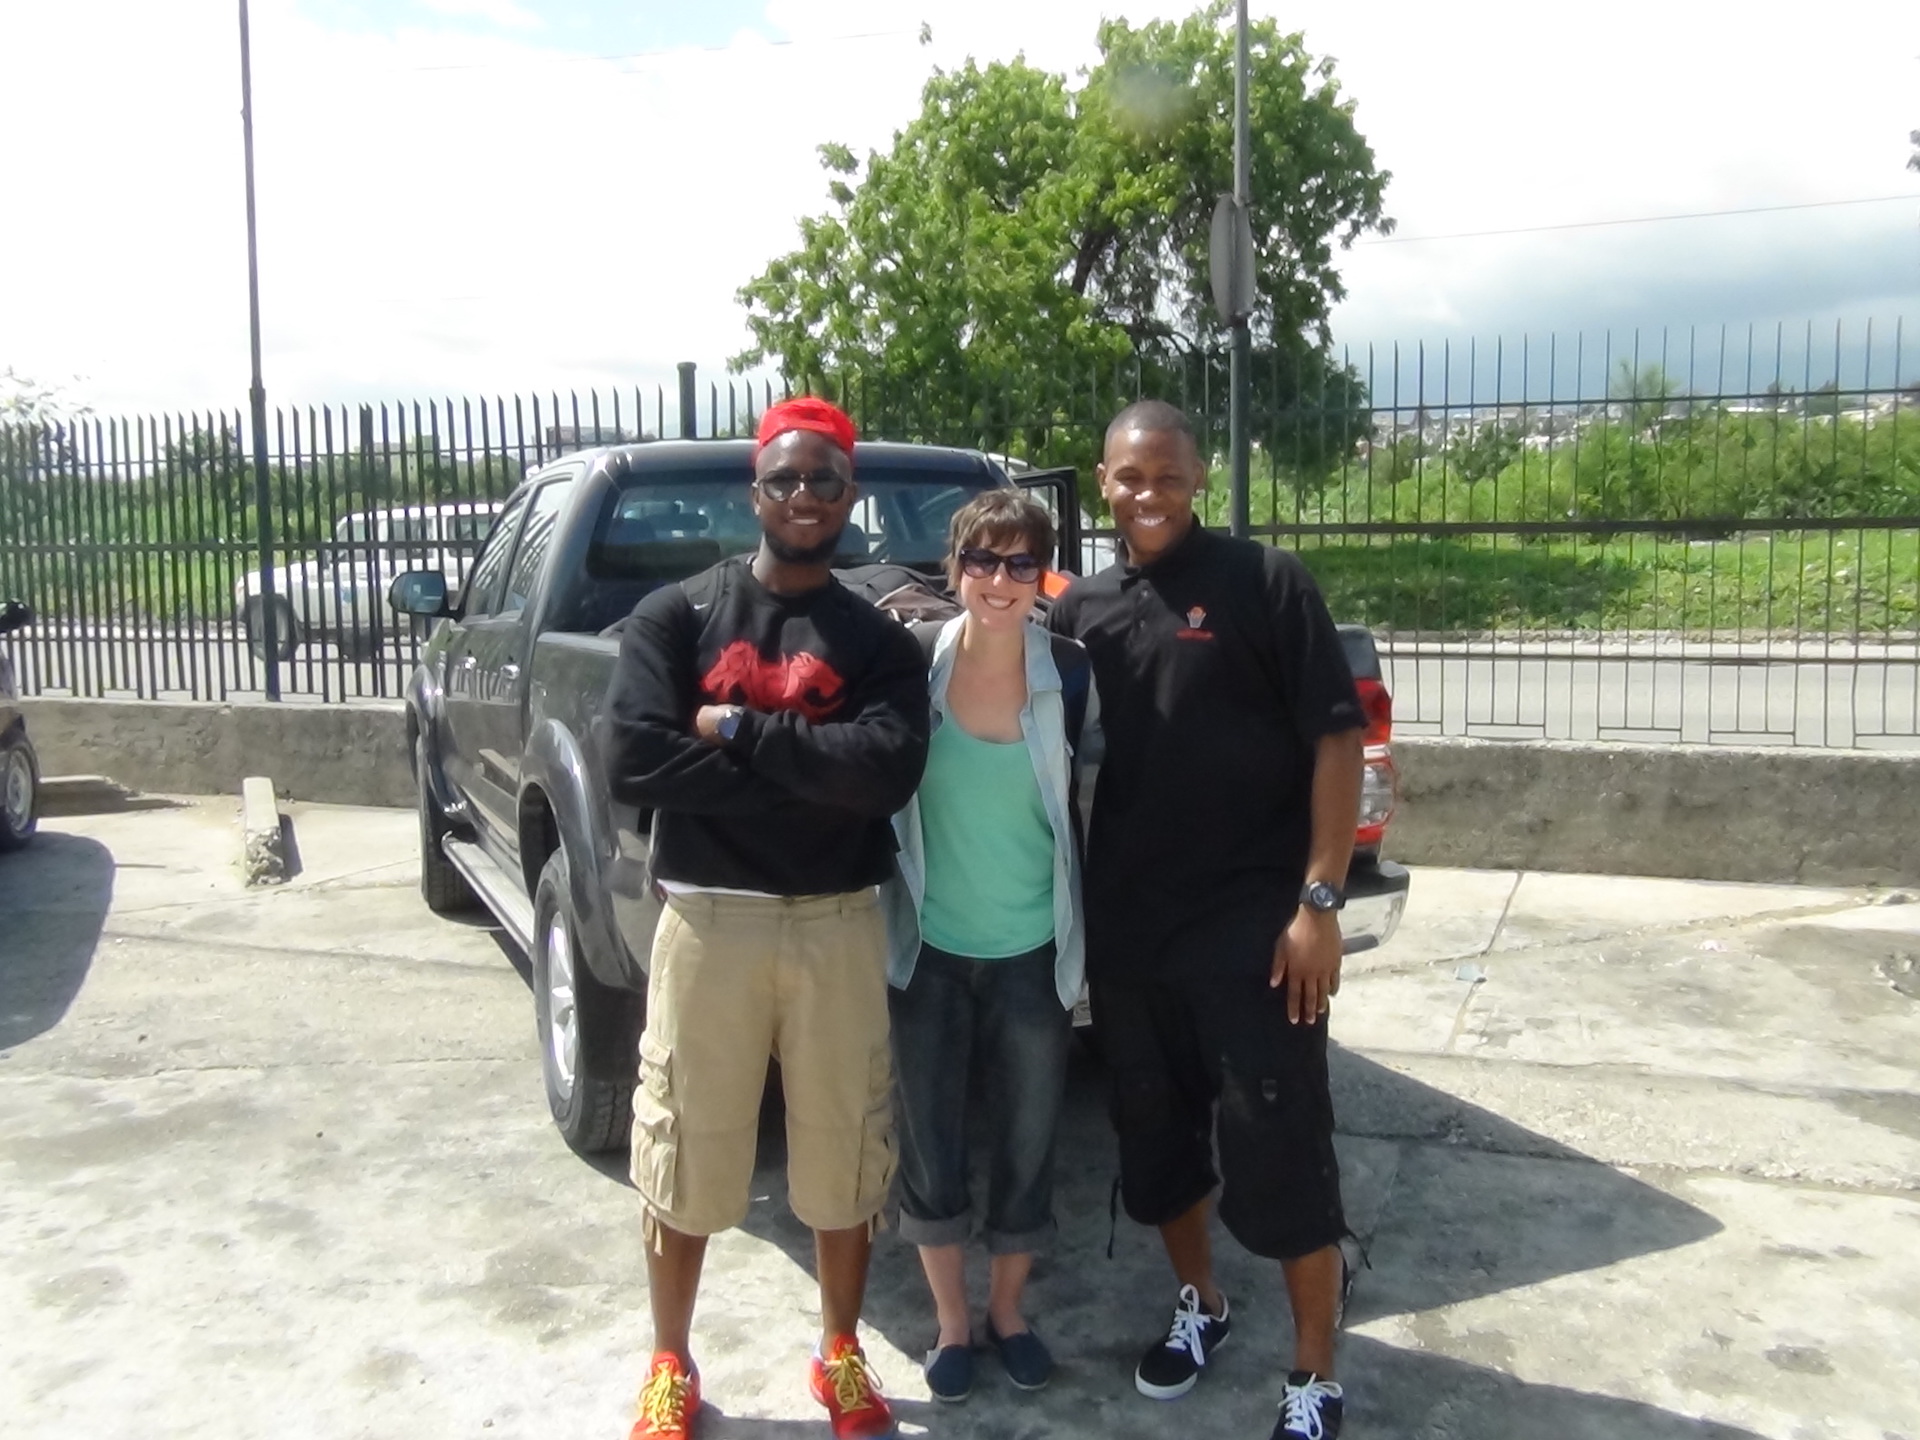 Our small team shorting after landing in Port au Prince in May 2014. From left to right, founder Ray Abellard, photographer Lexi Namer, and co-founder Andre Murray.